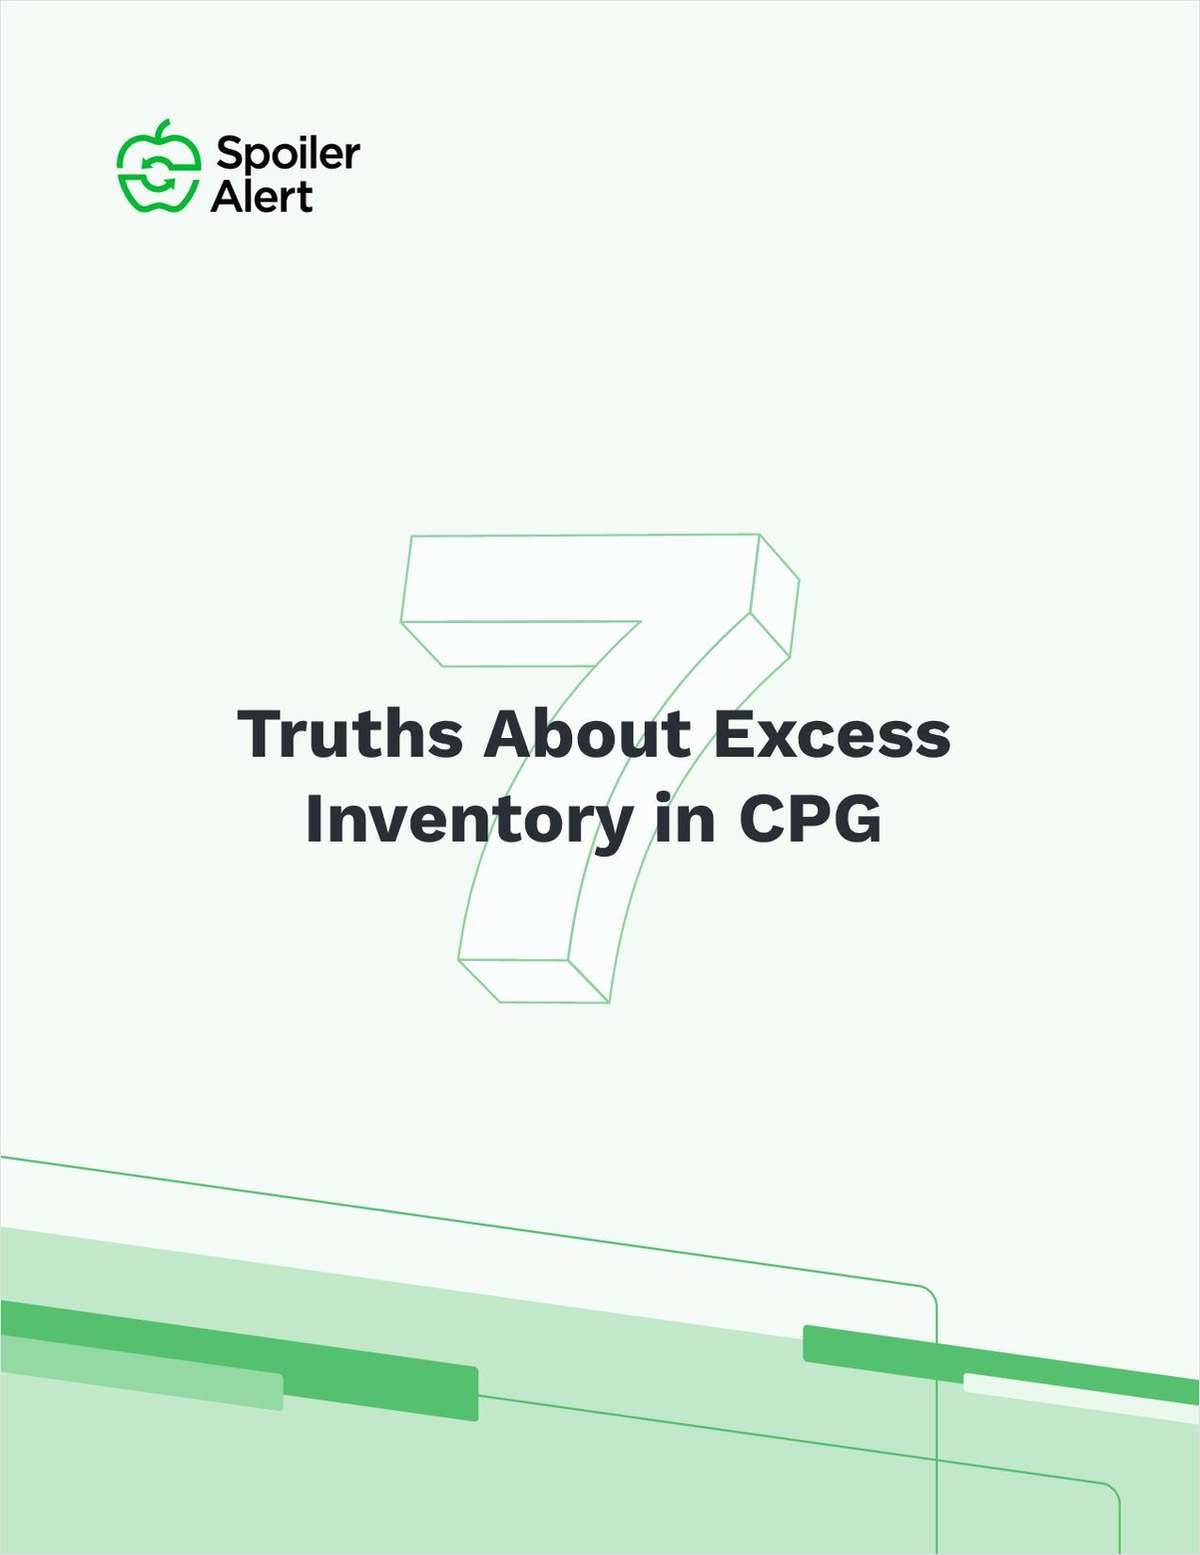 7 Truths About Excess Inventory in CPG